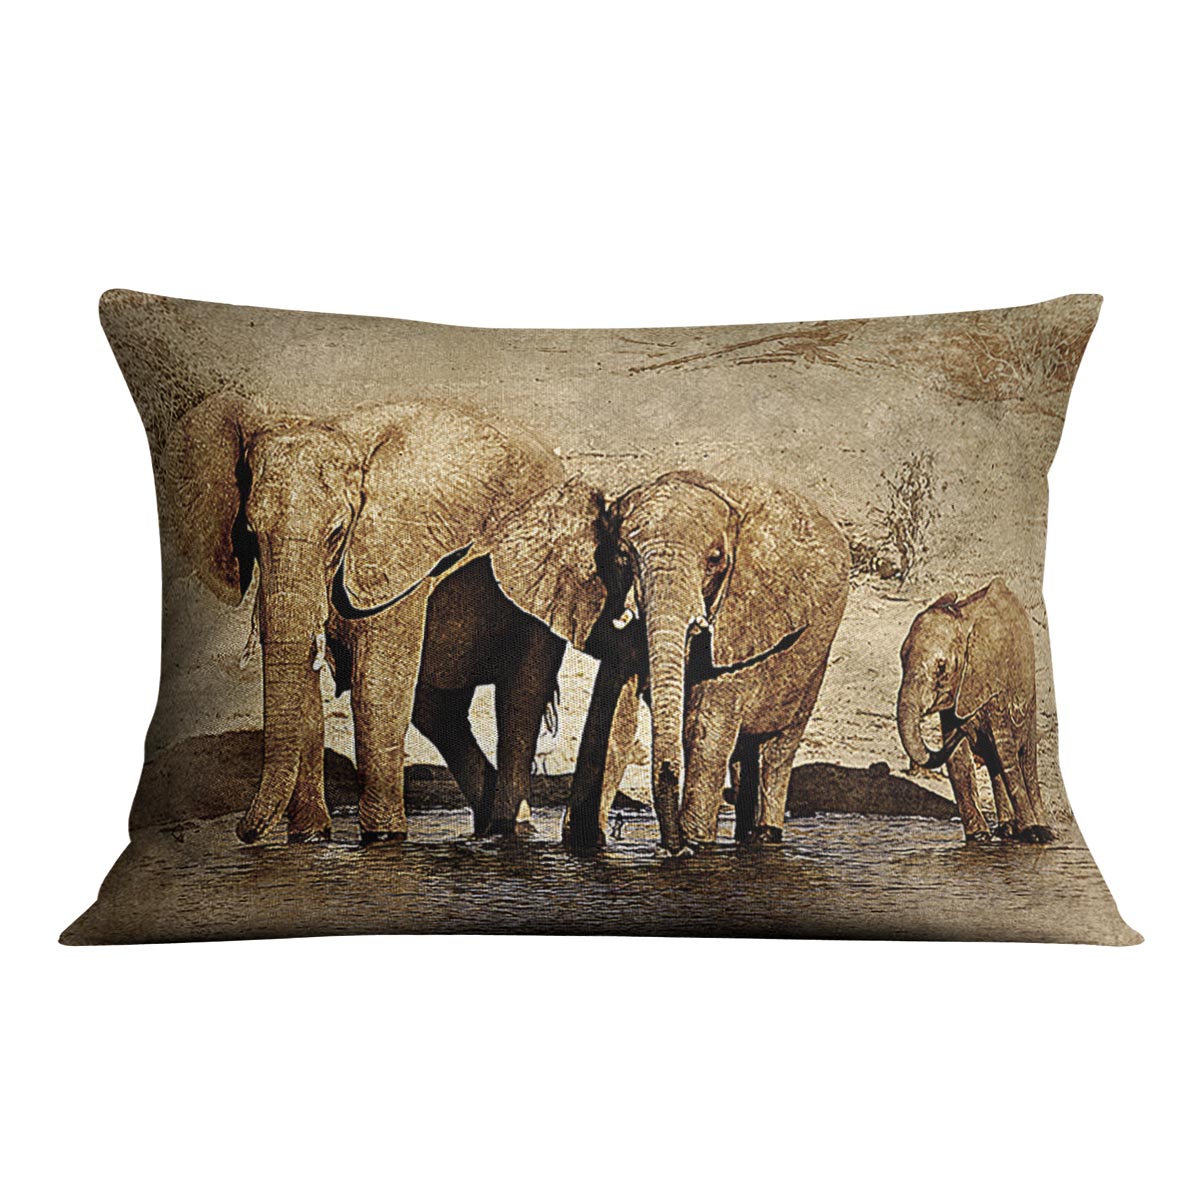 The Elephants March Version 2 Cushion